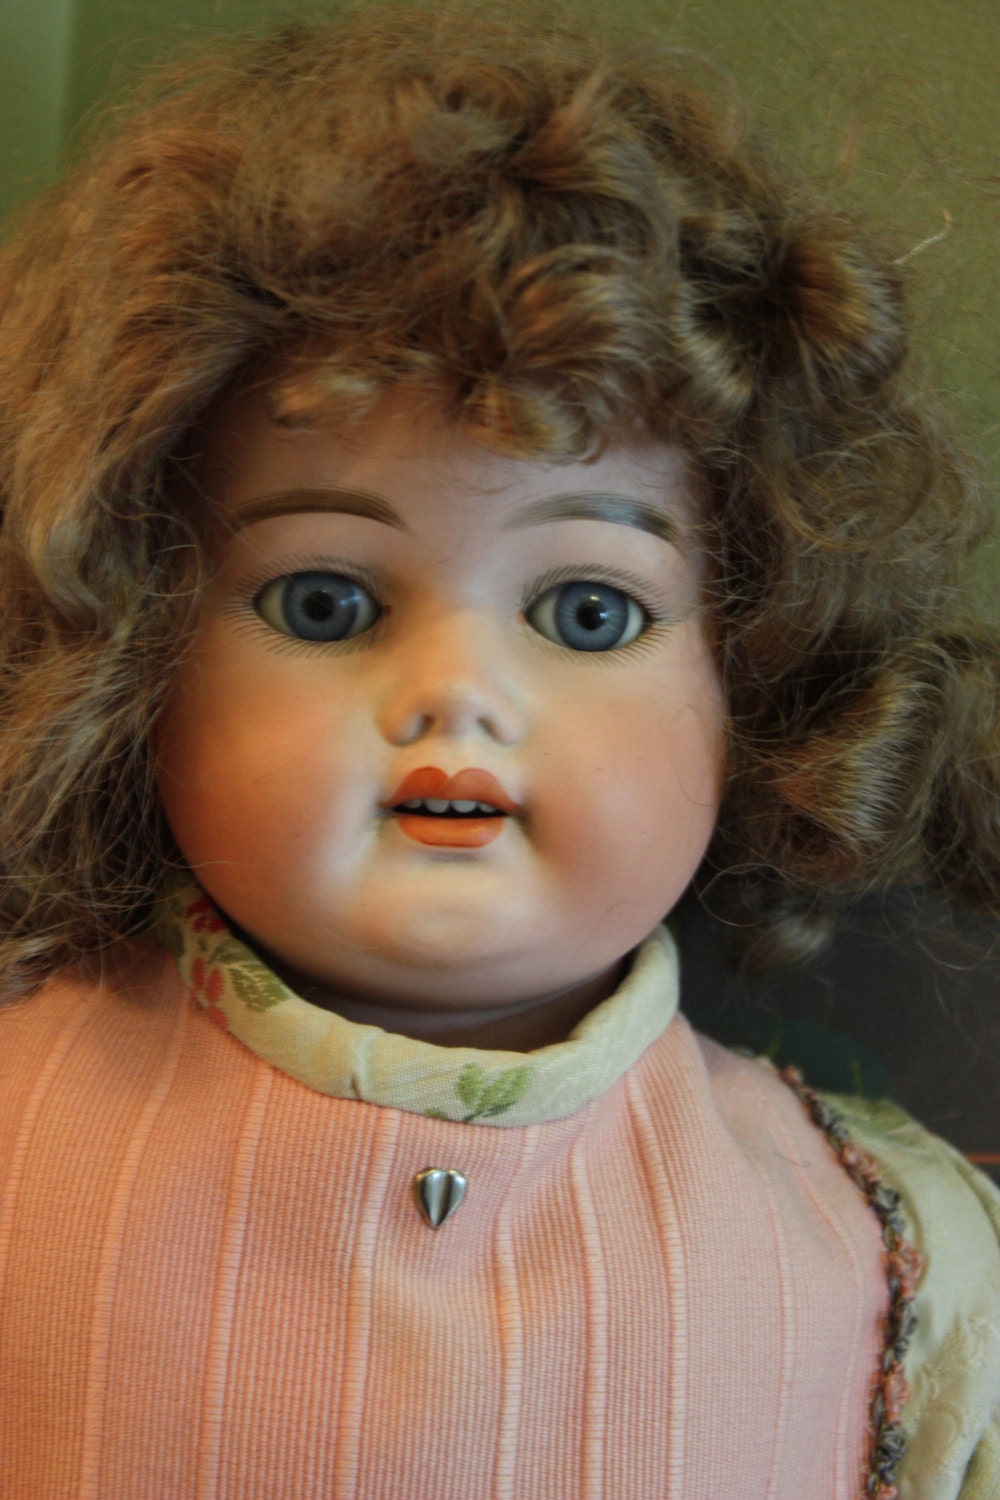 Schoenau & Hoffmeister Composition Doll with Bisque Head, Model 5000